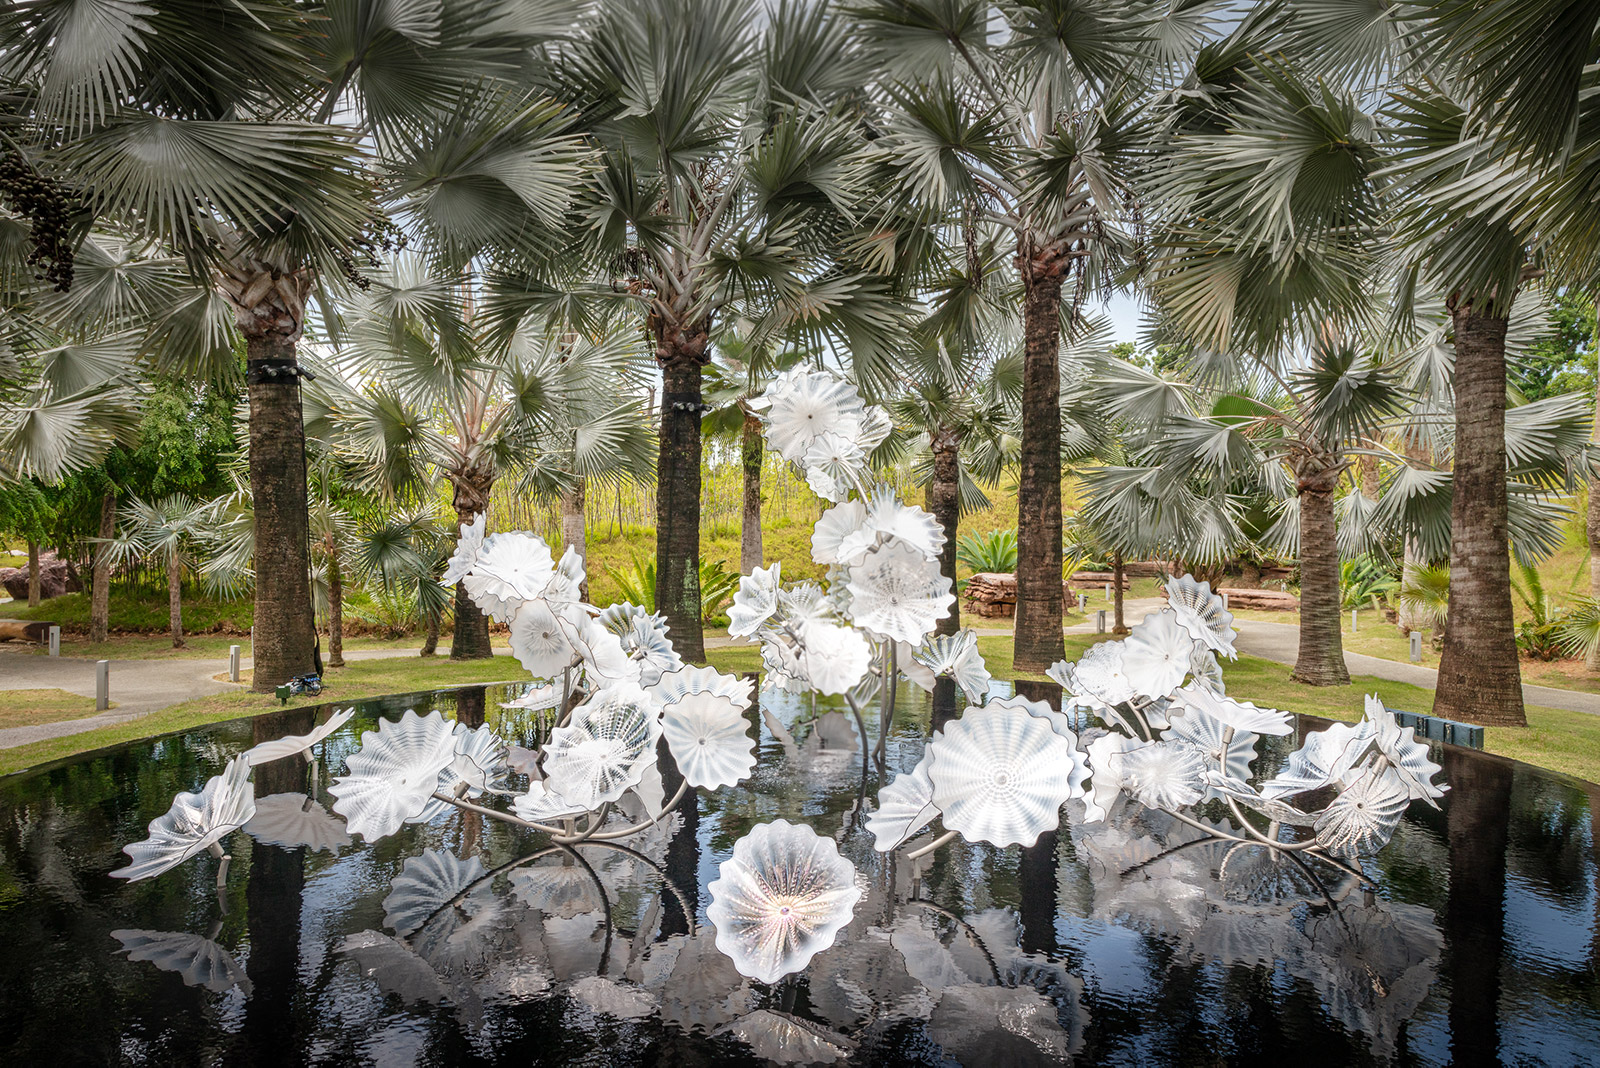 Dale Chihuly, Ethereal White Persian Pond, 2018